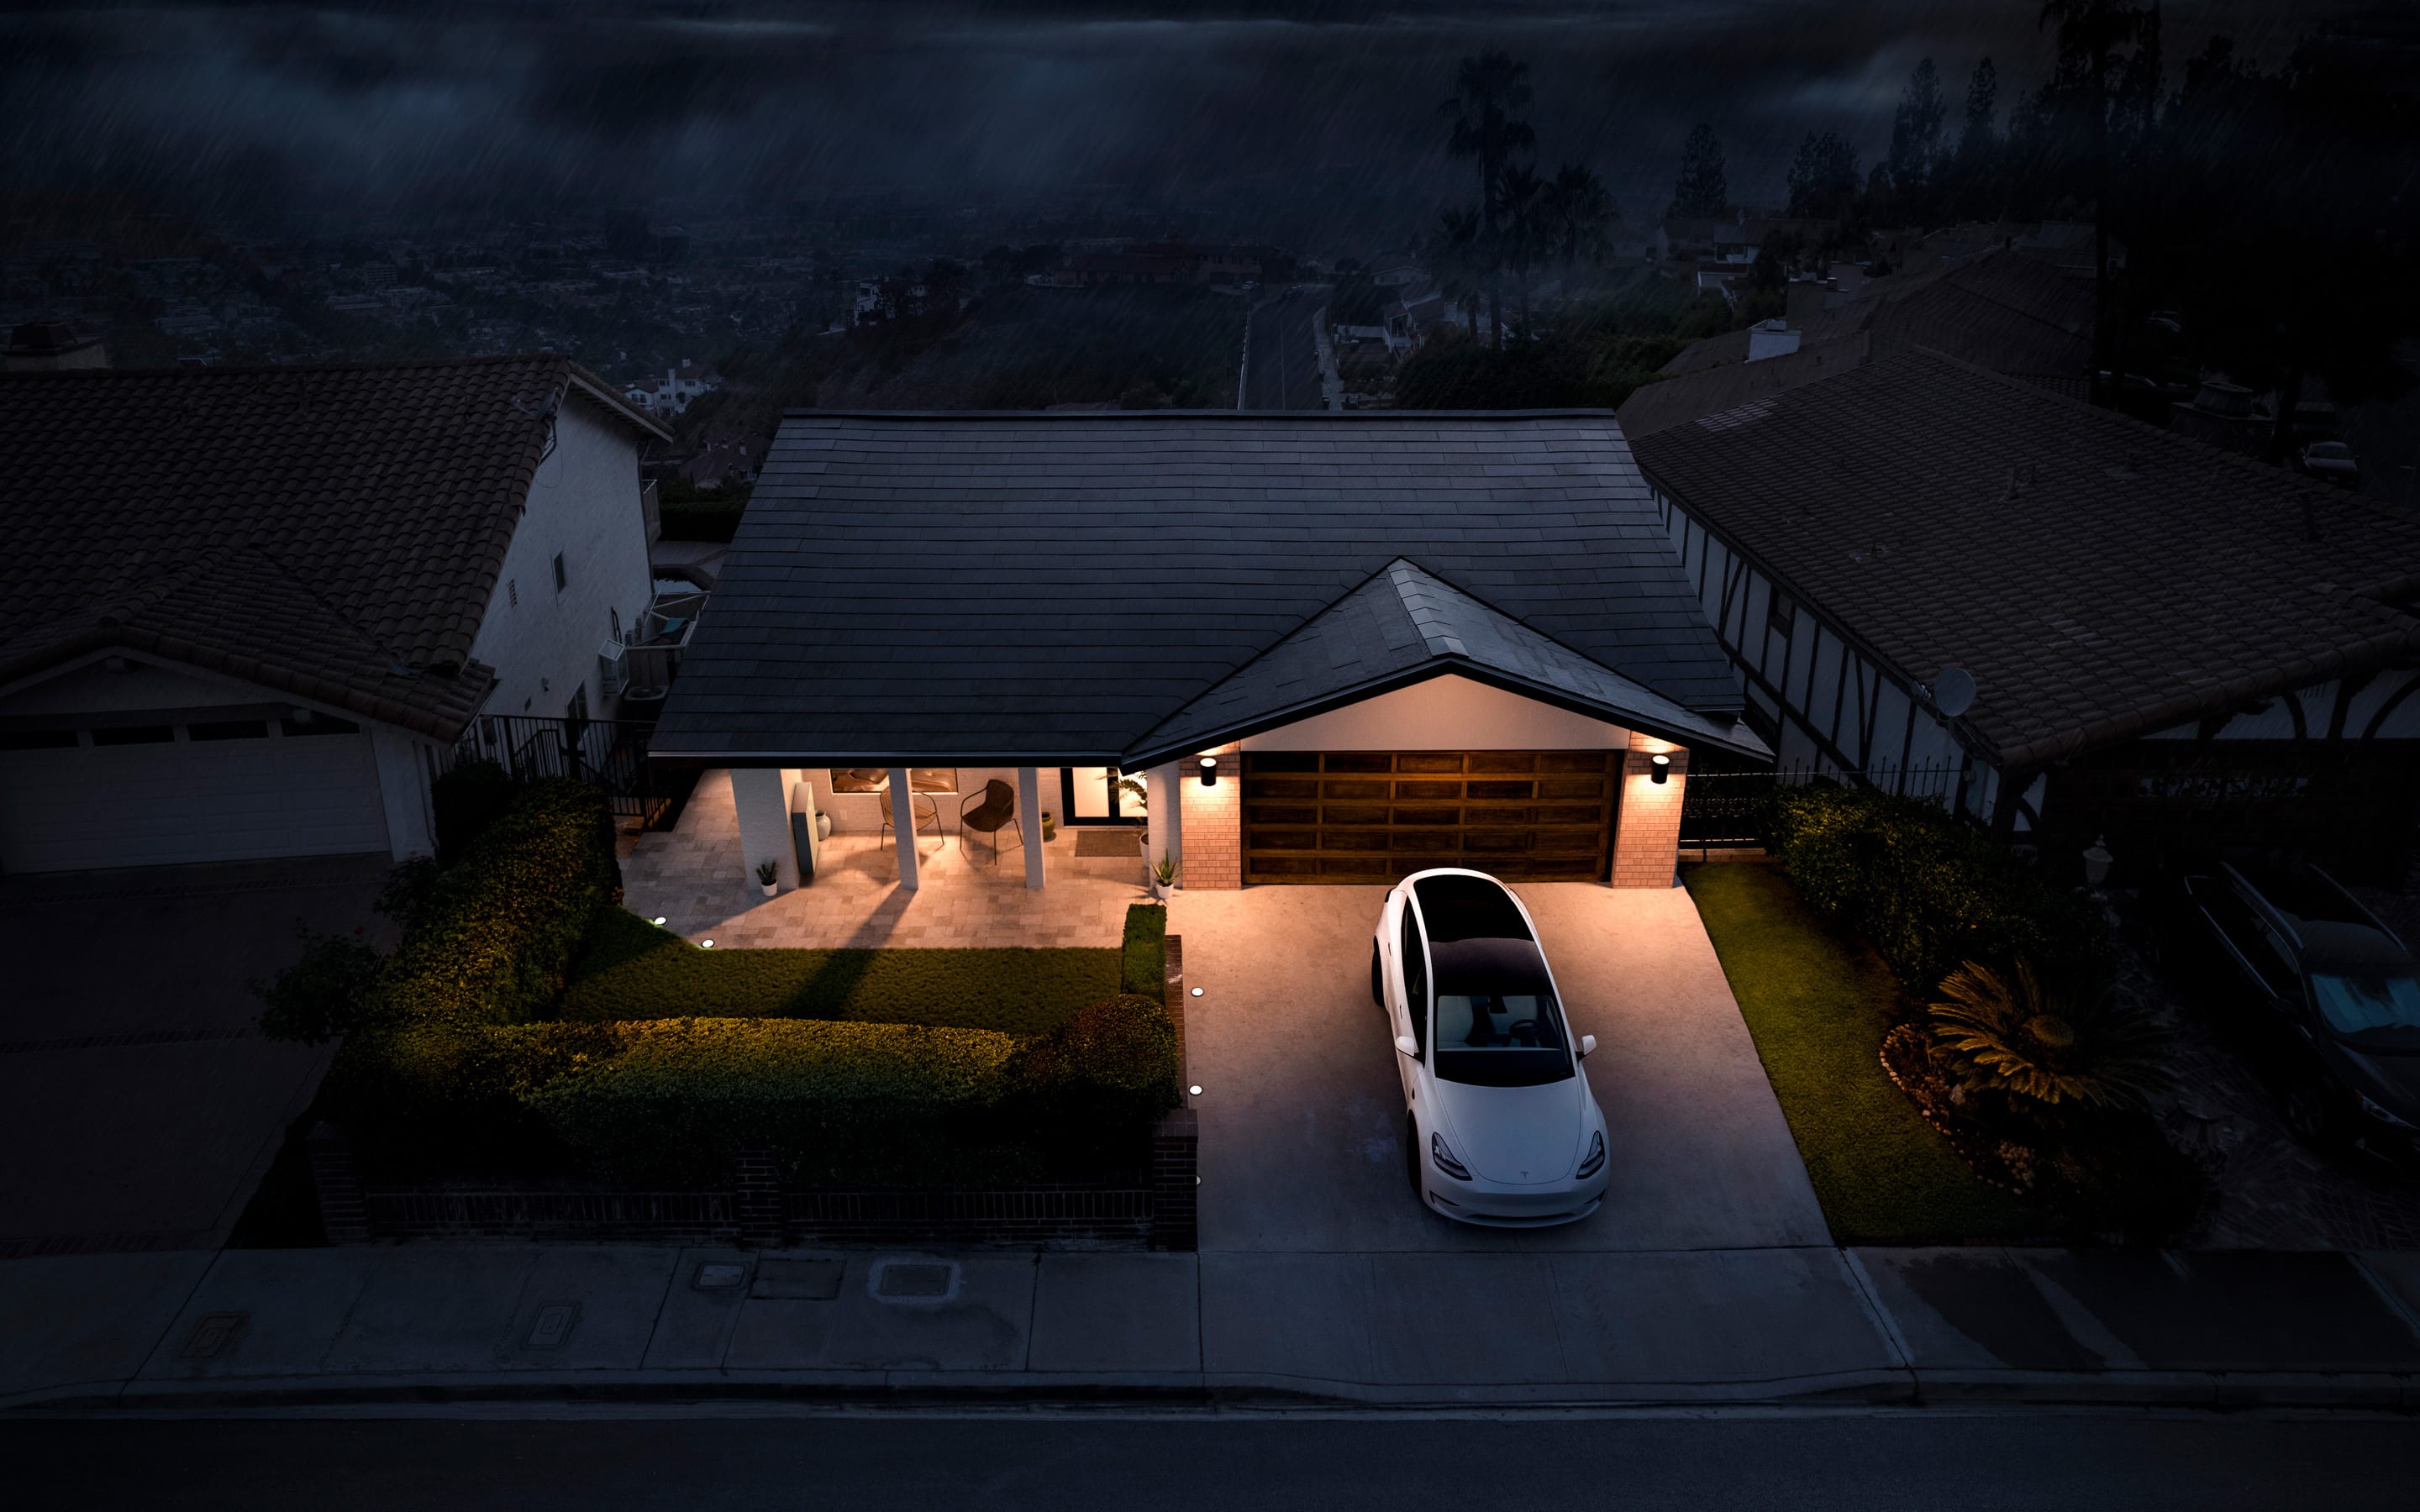 Solar Roof on single story home with white Model 3 in driveway